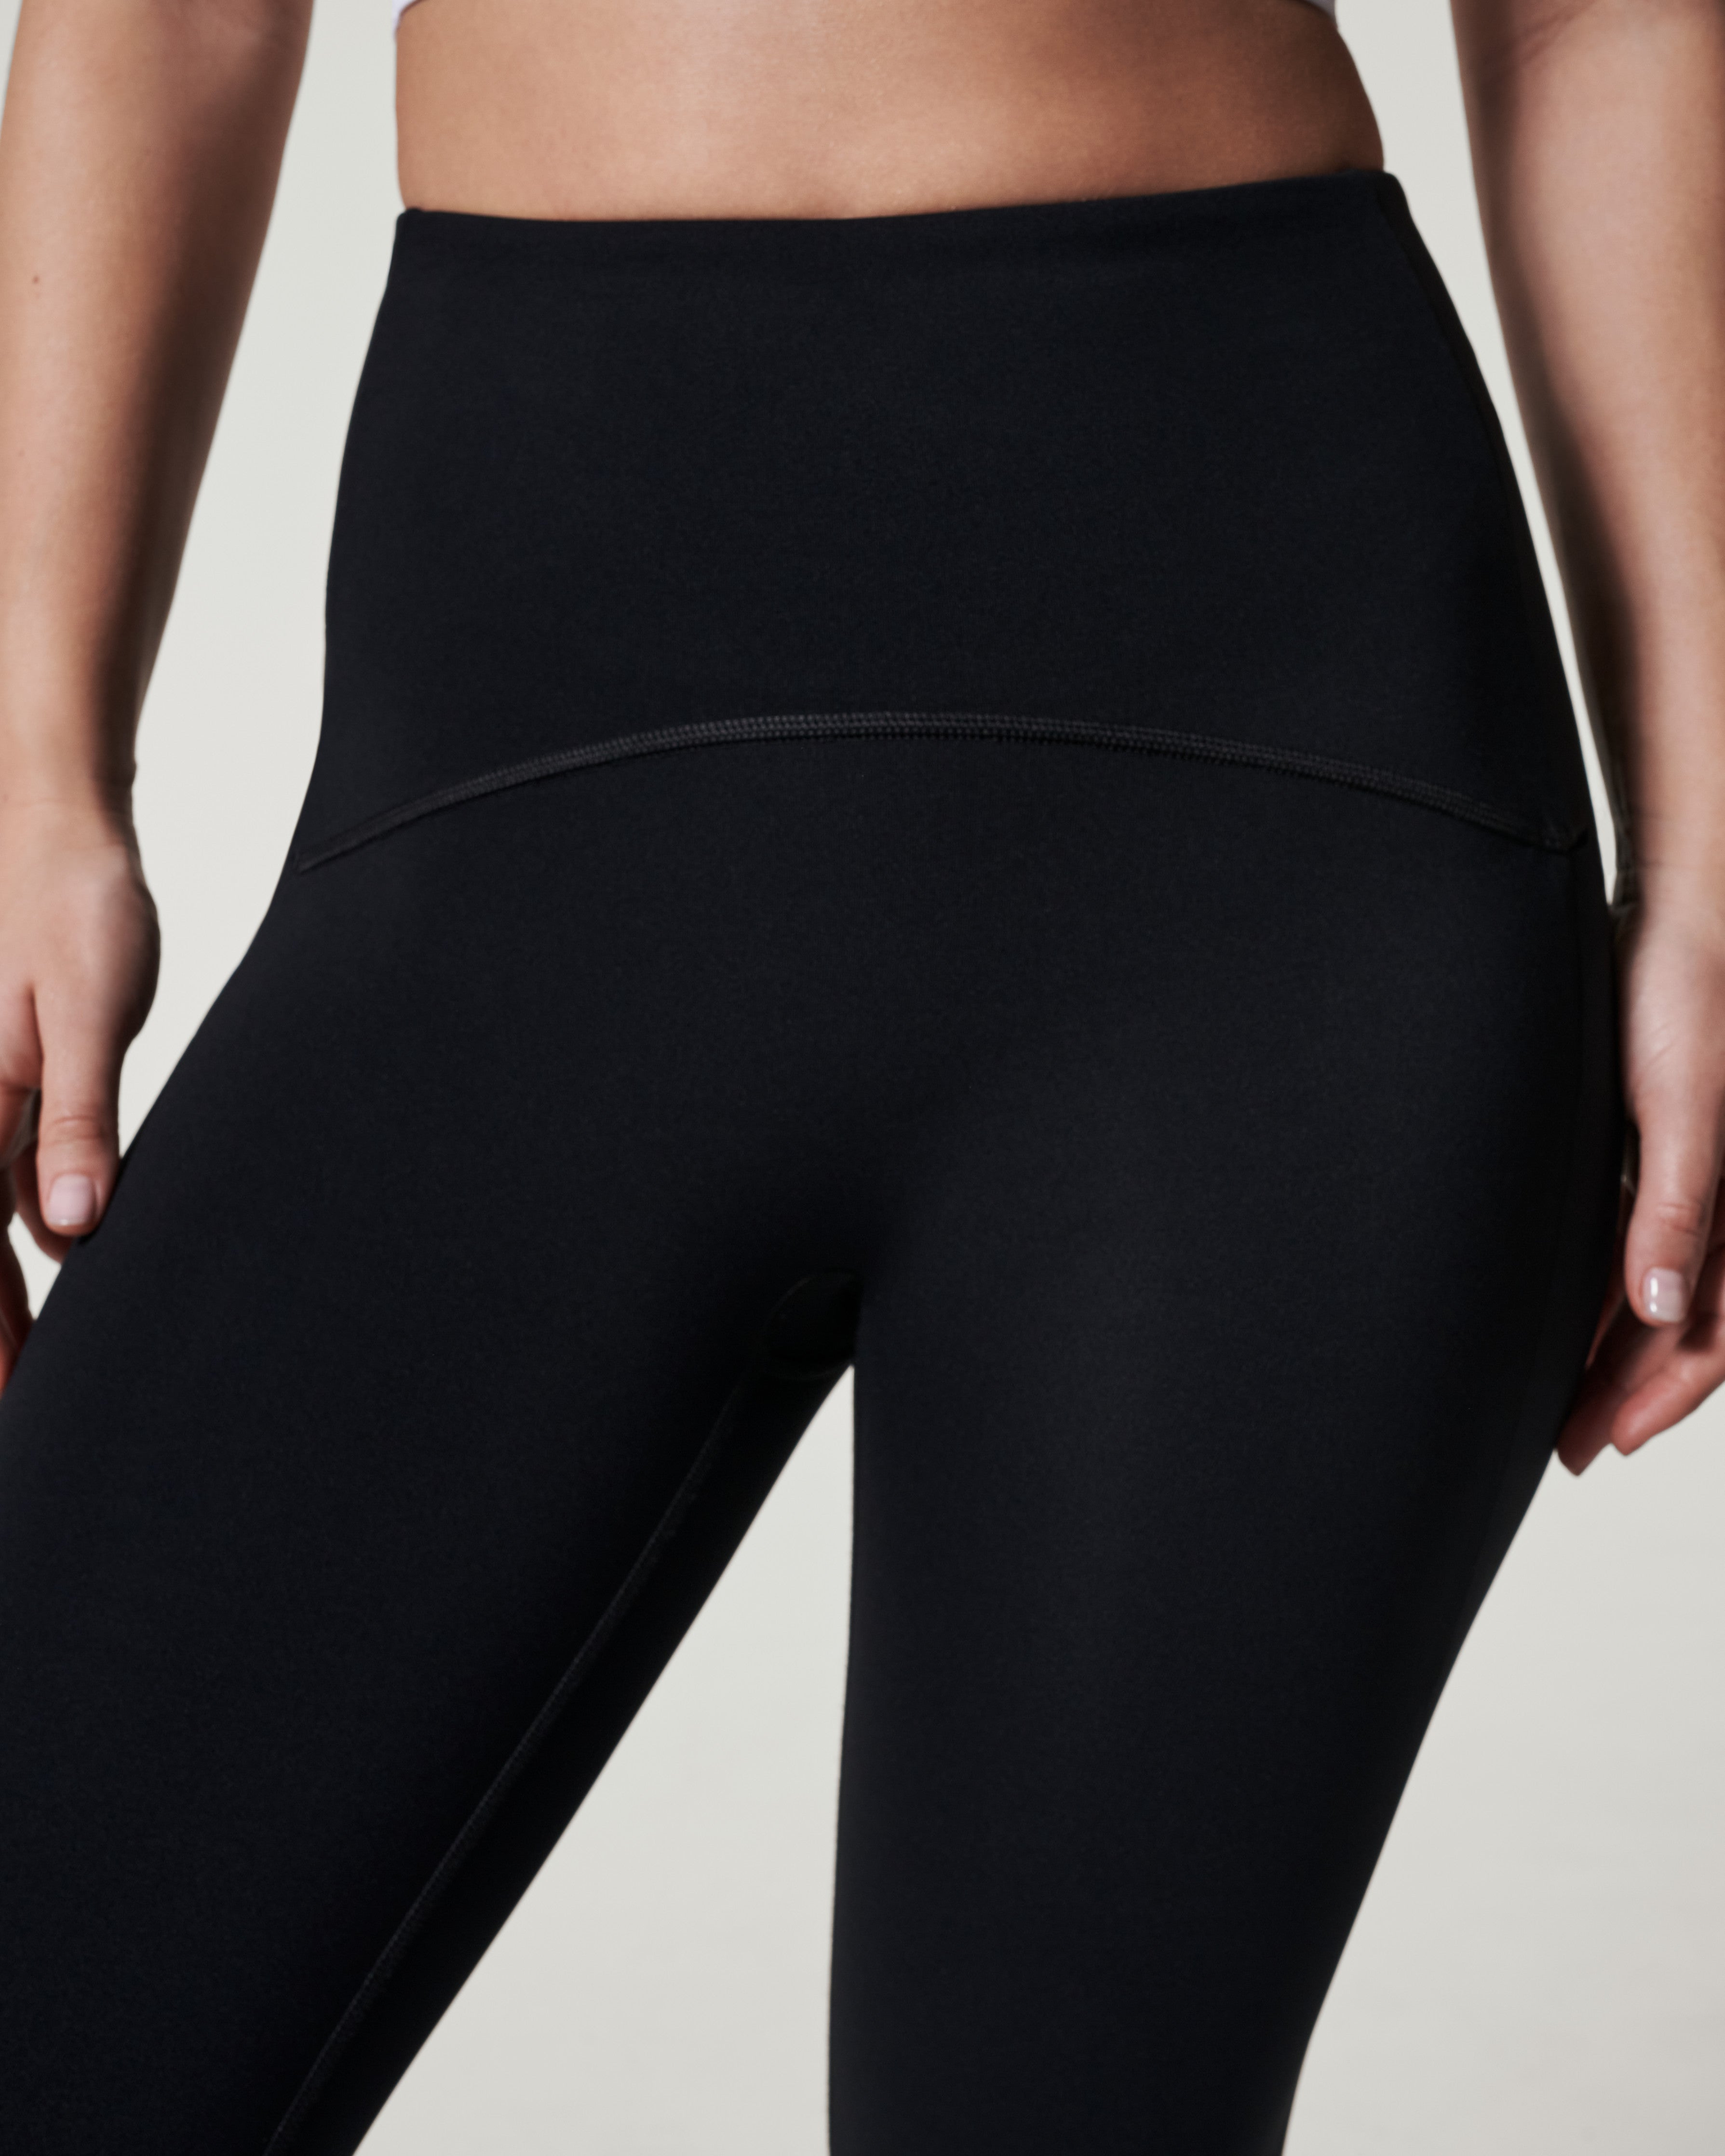 SPANX on X: Who knew pockets could lift your booty? WE DID